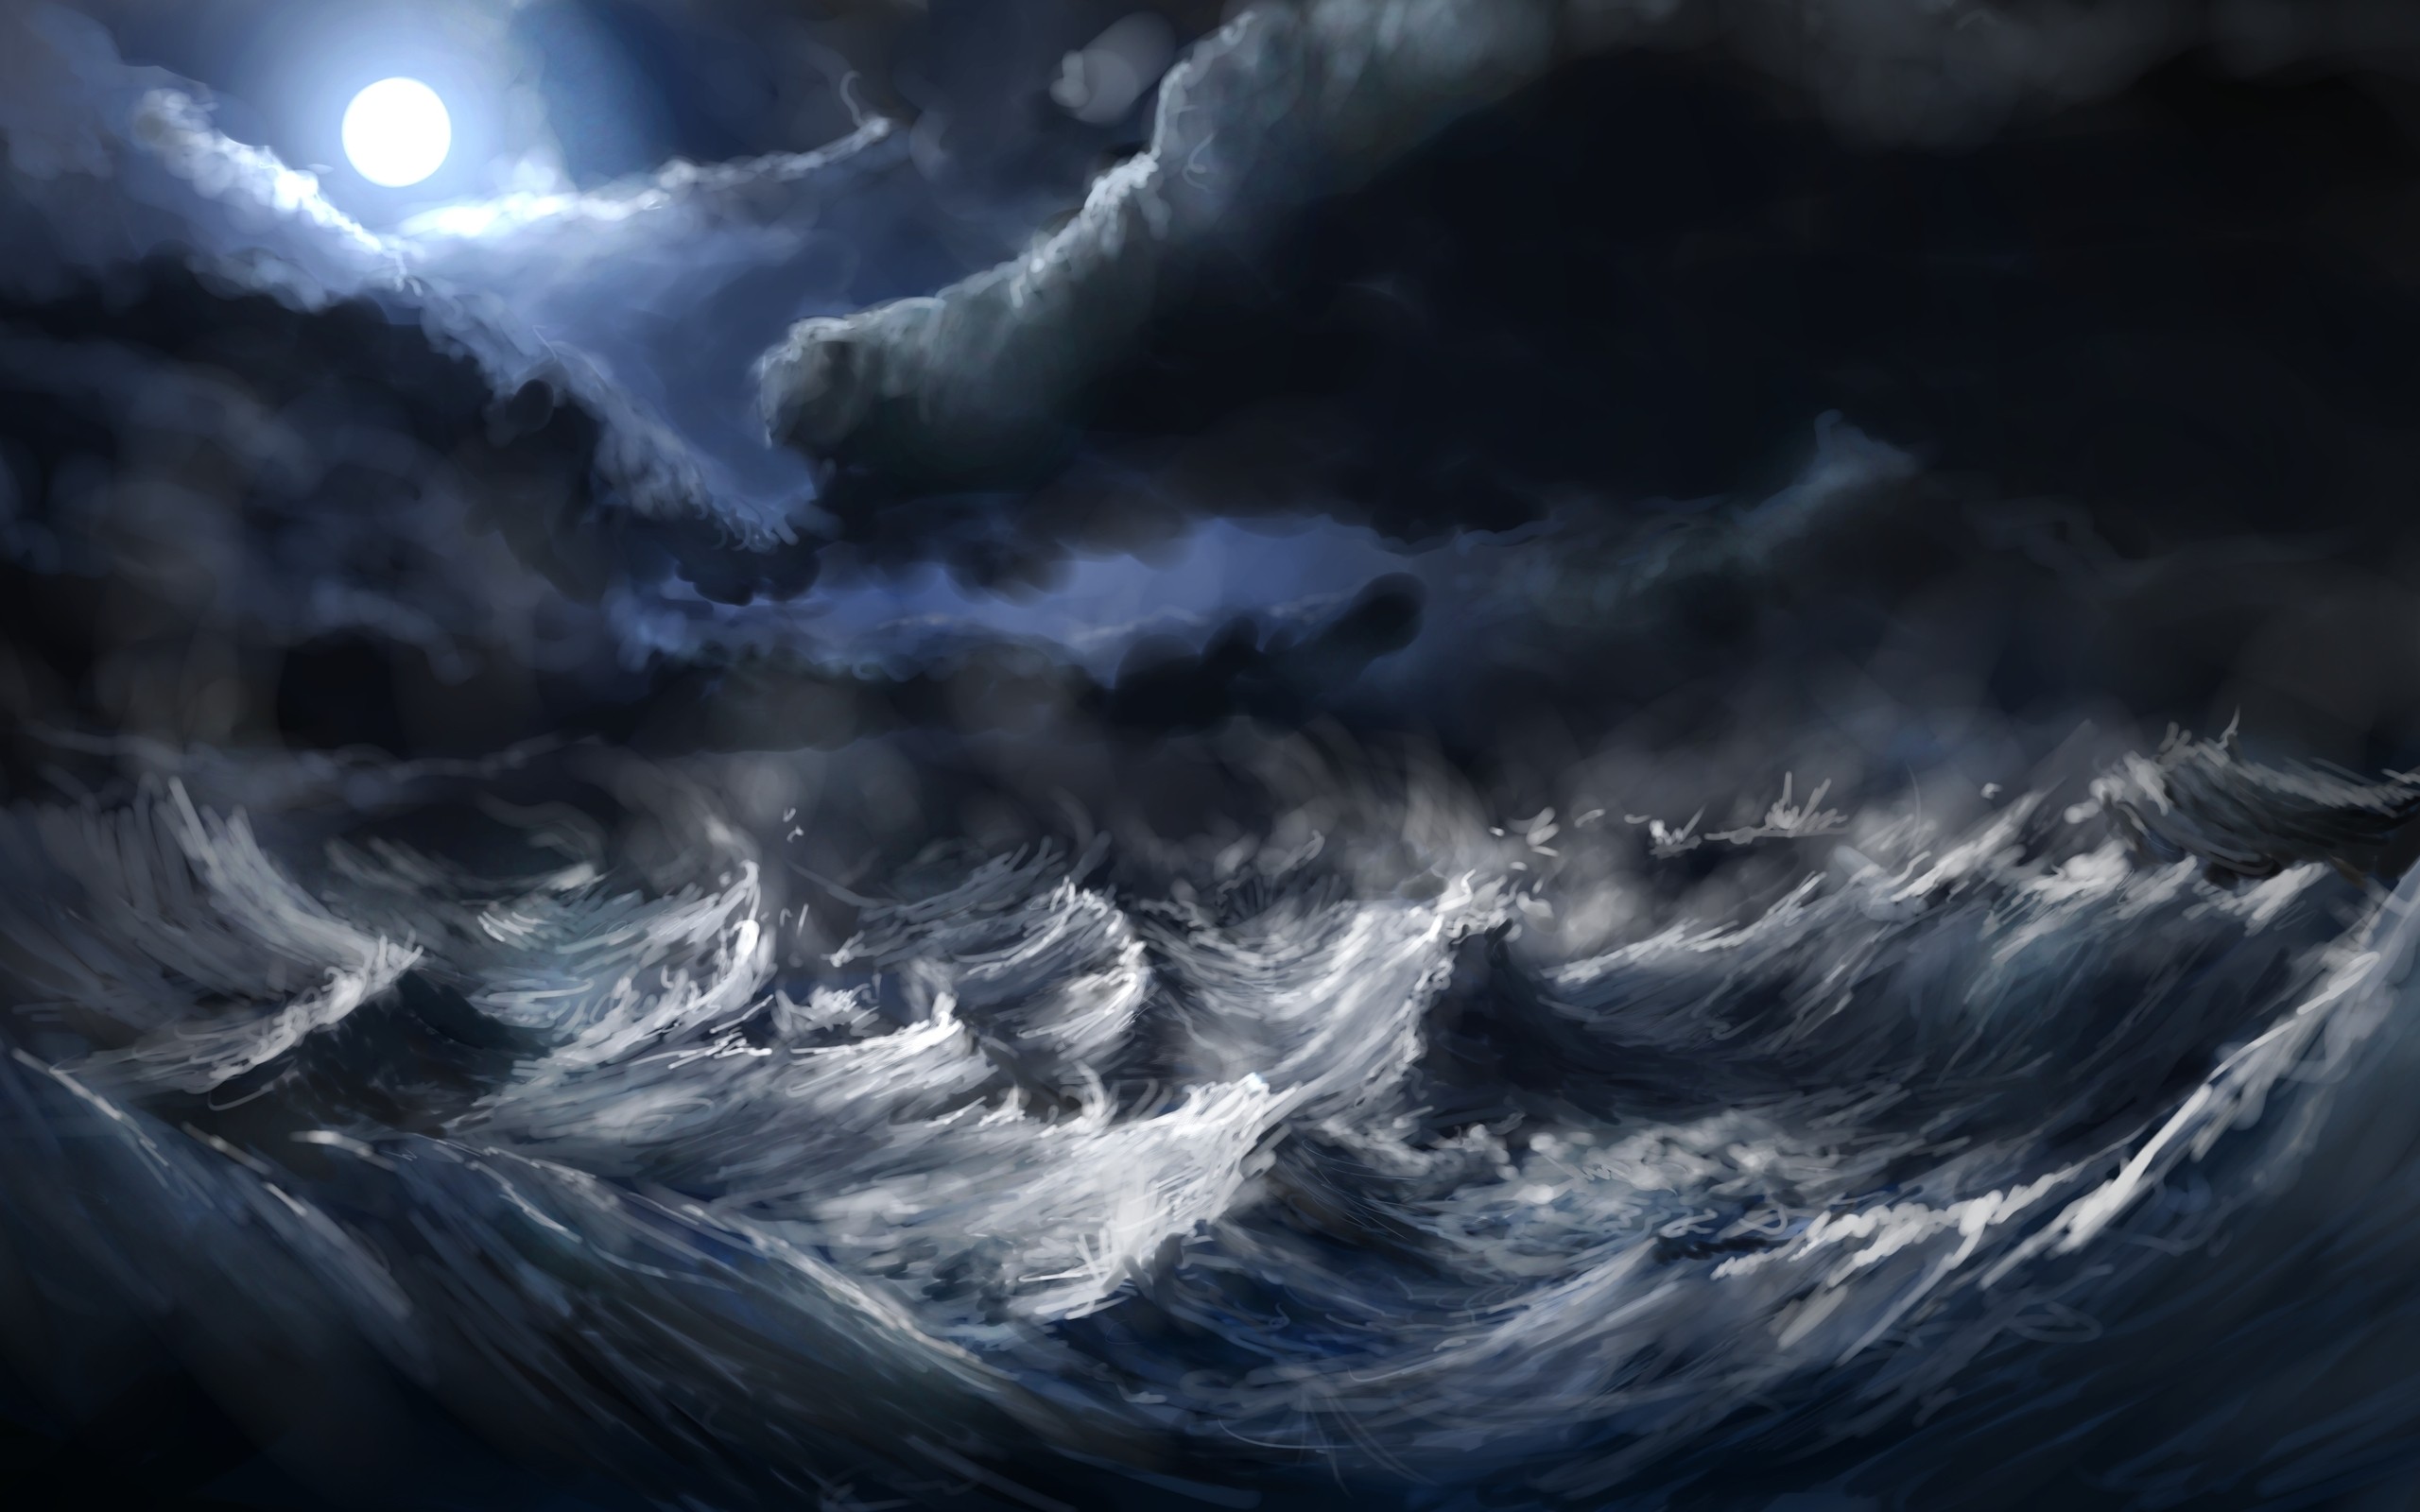 Storm wallpapers, CGI, HQ Storm pictures | 4K Wallpapers 2019